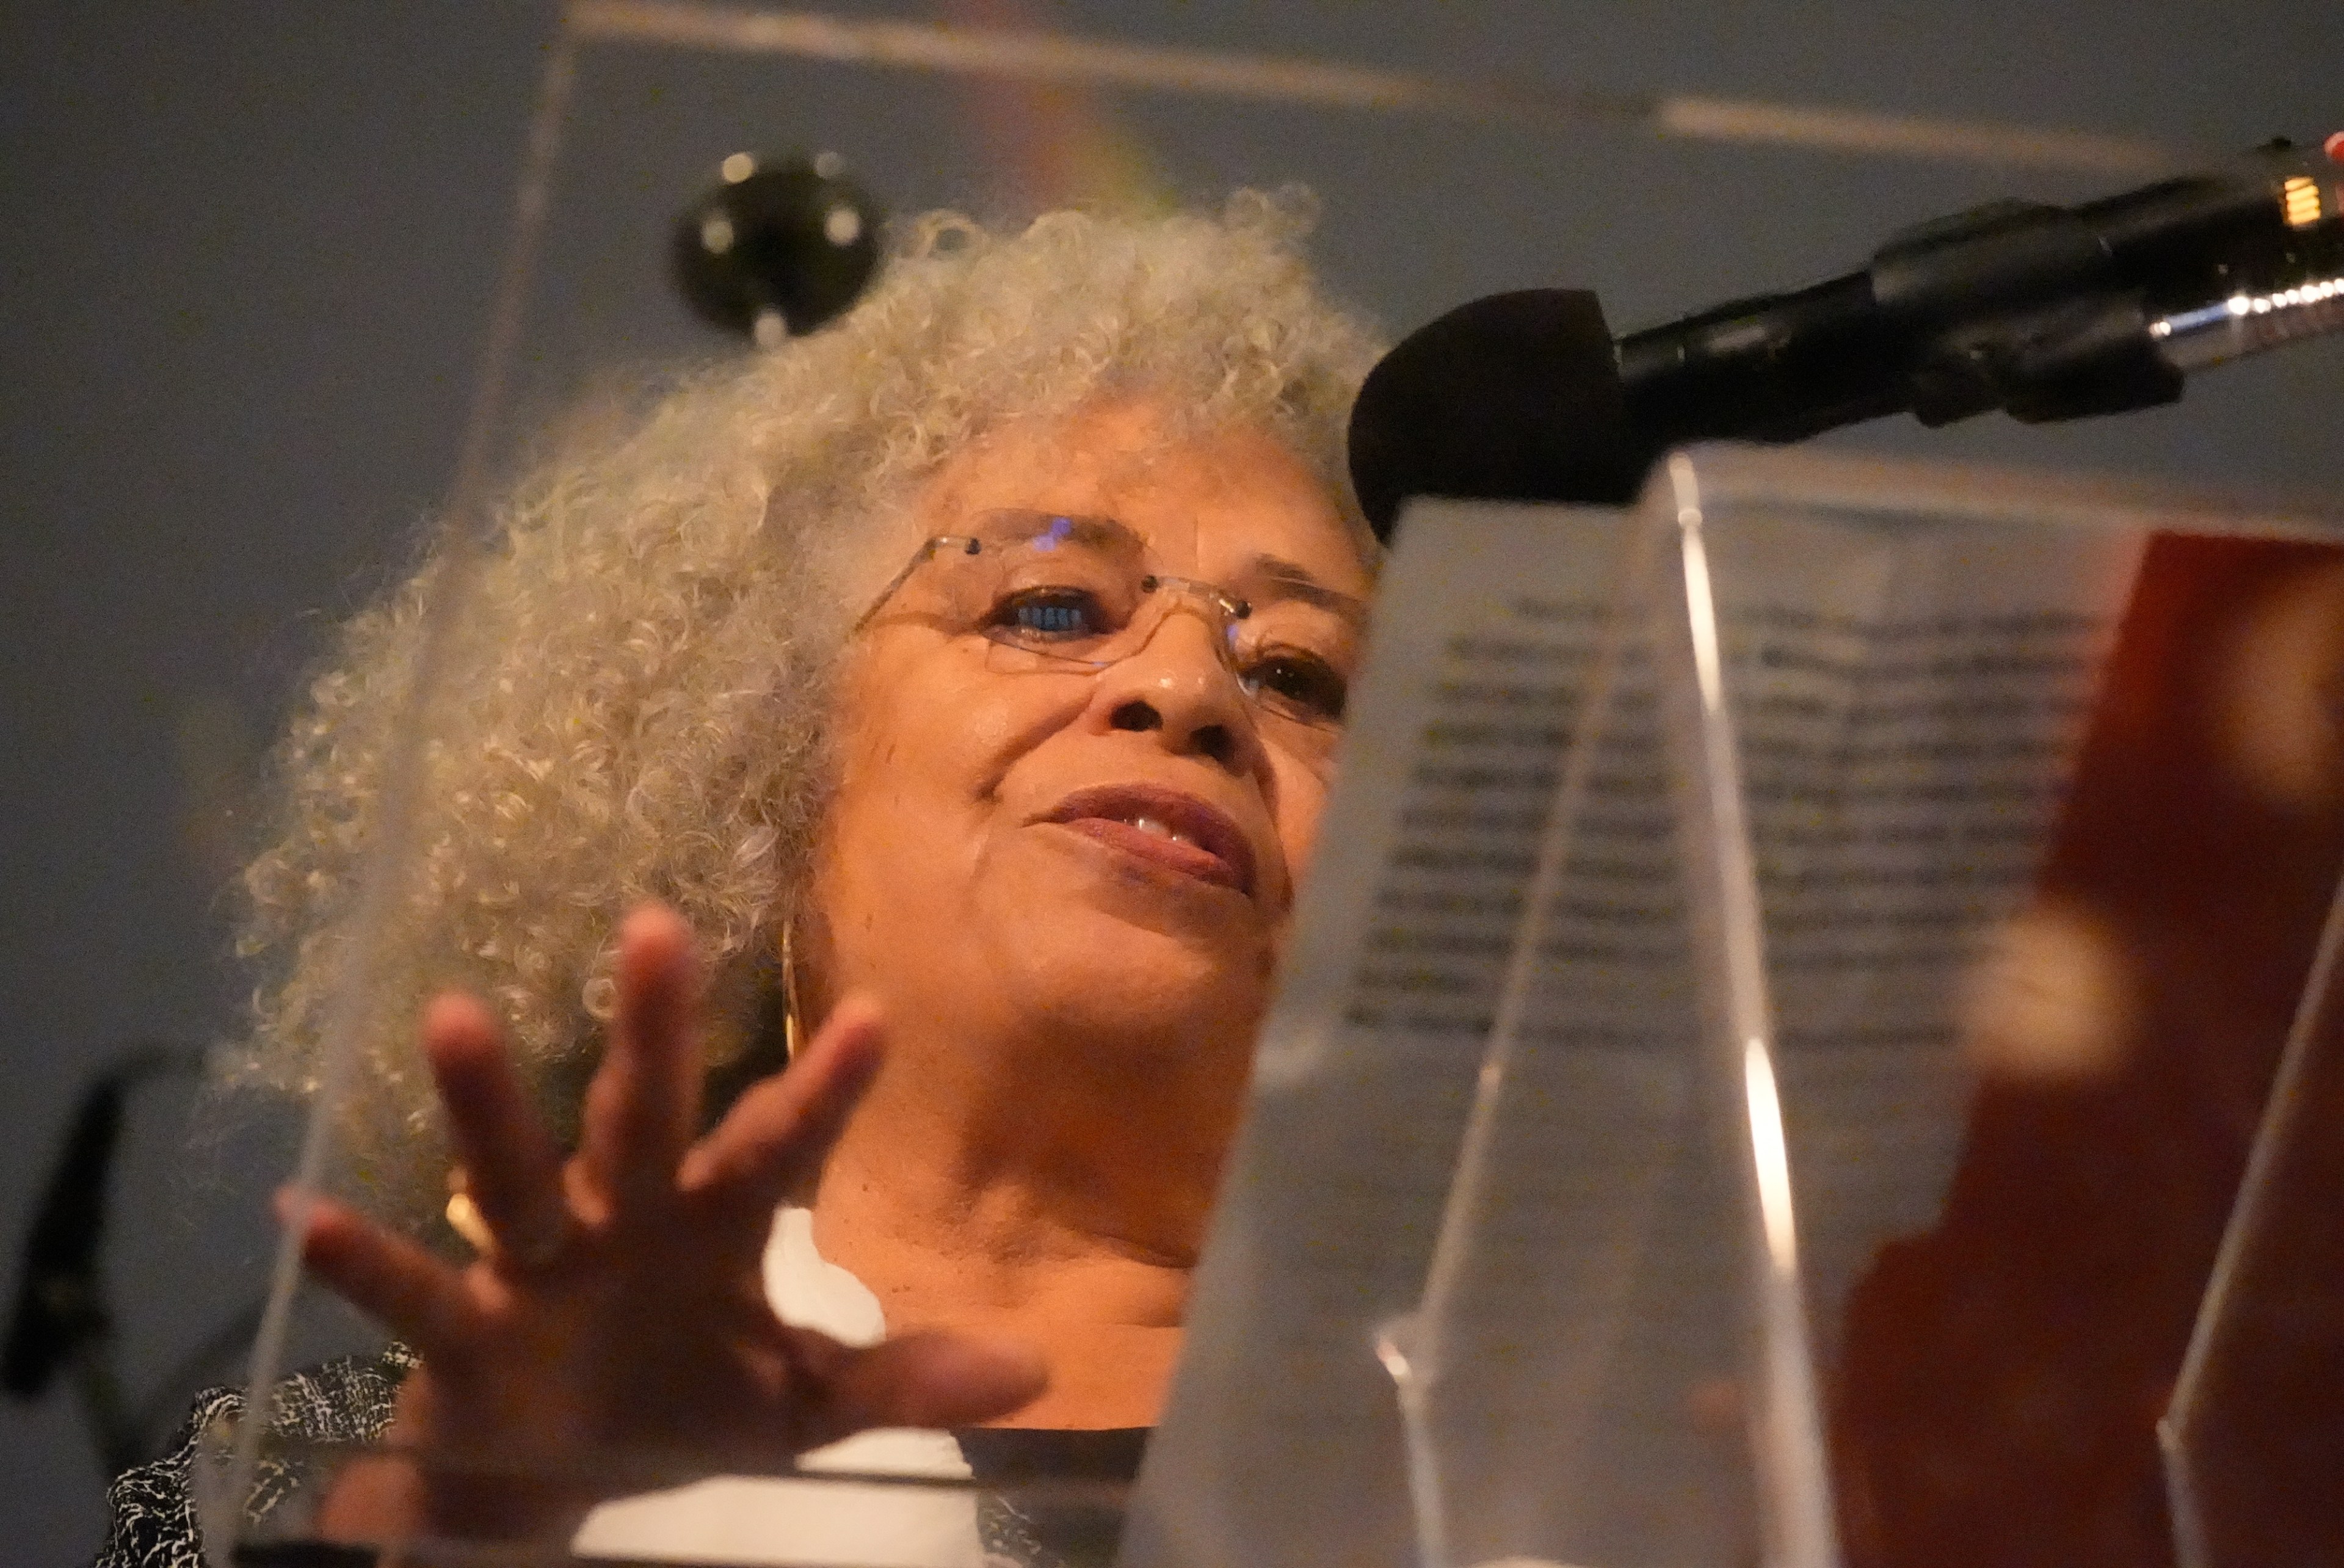 An older woman with curly gray hair is speaking into a microphone, partially obscured by a stand and gesturing with her hand.